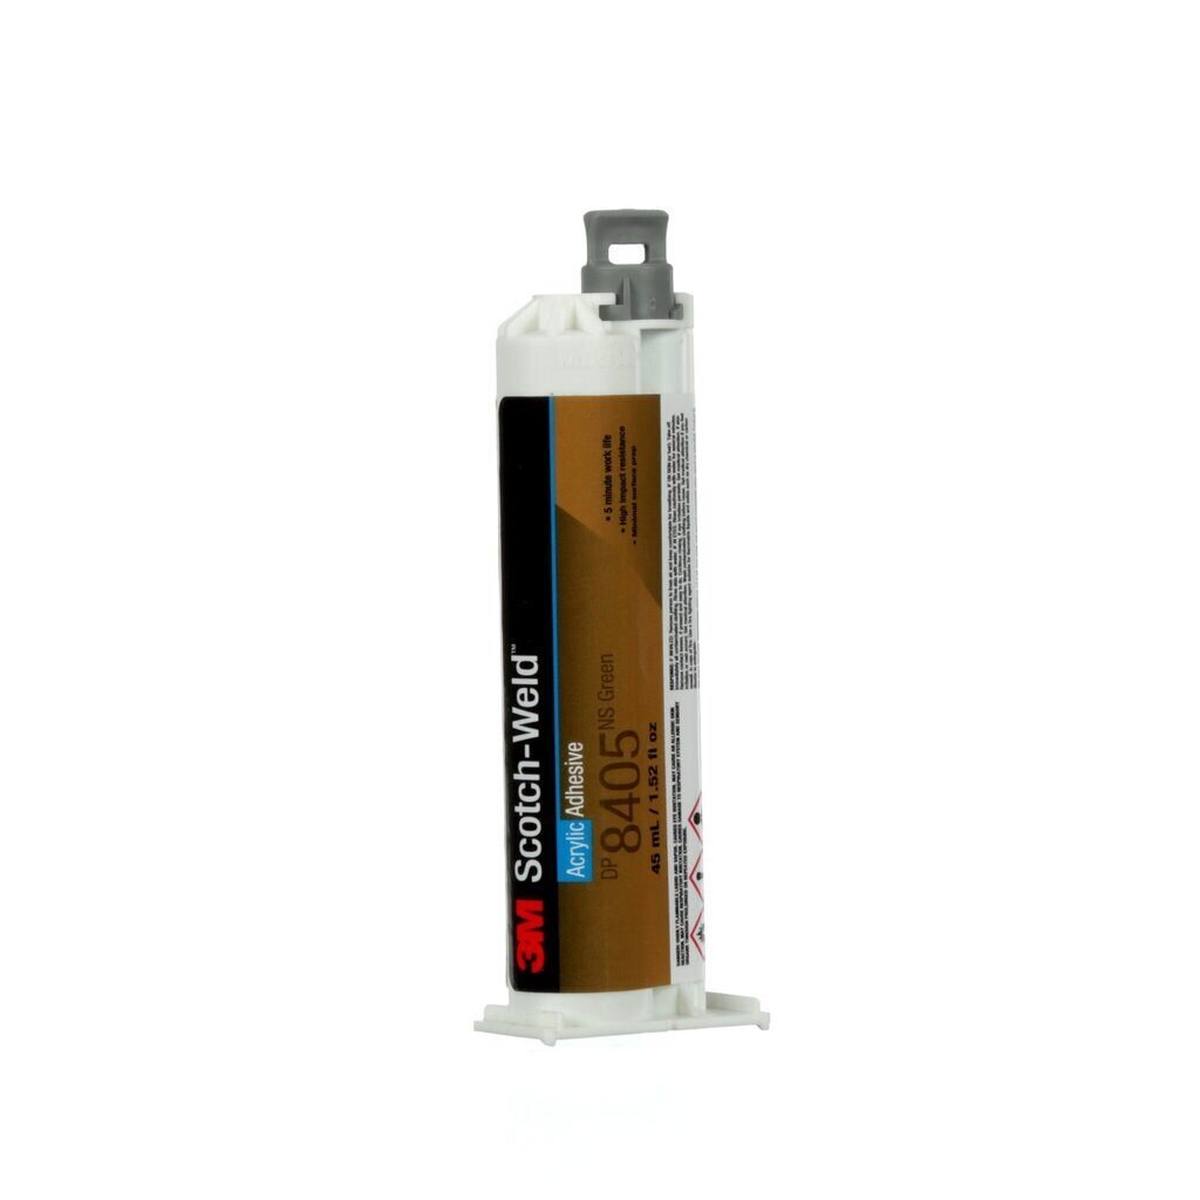 3M Scotch-Weld 2-component acrylic-based construction adhesive for the EPX System DP 8405 NS, green, 45 ml